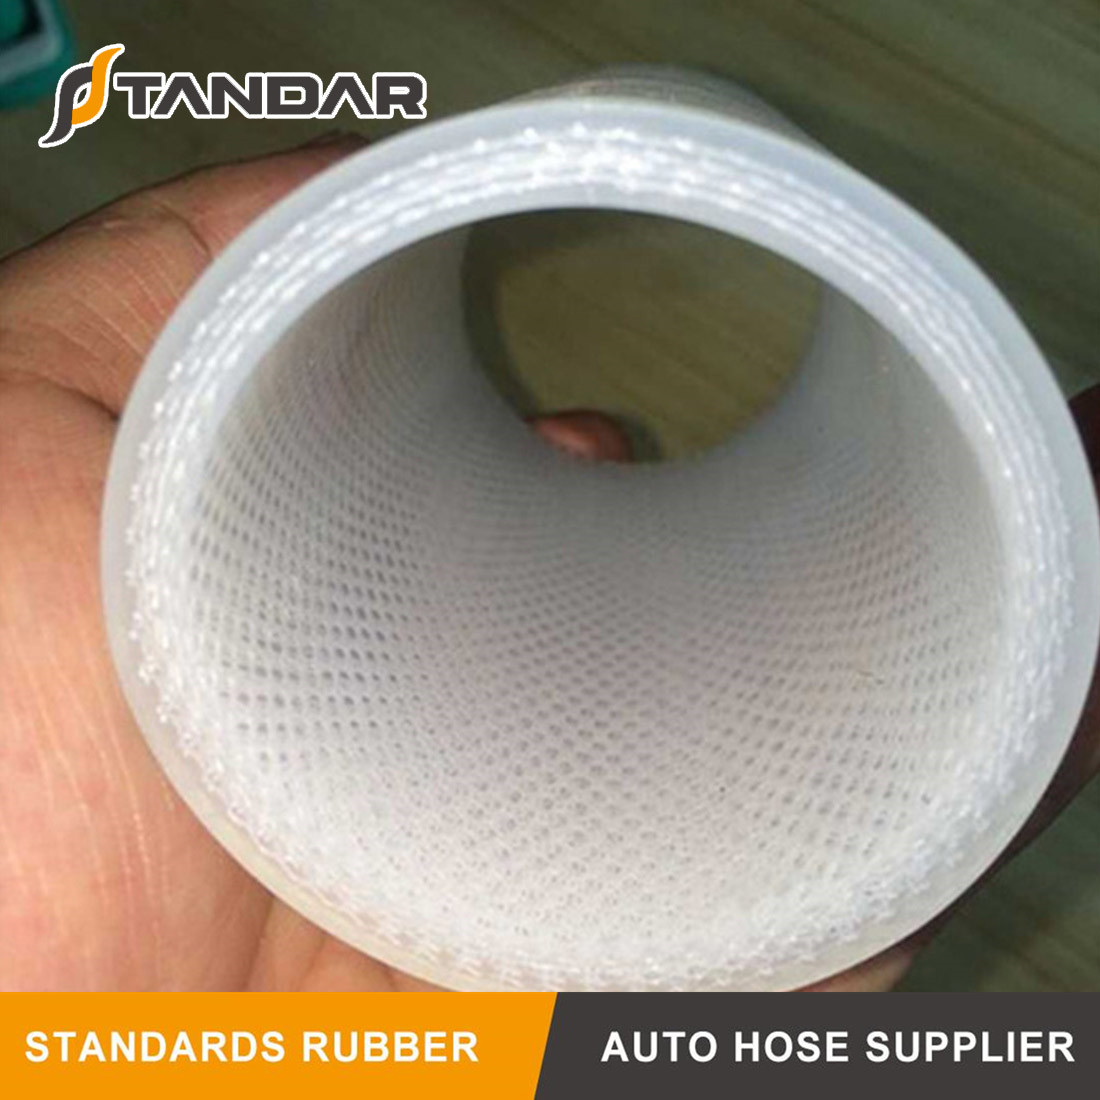 Food grade silicone hose's Ingredients and uses